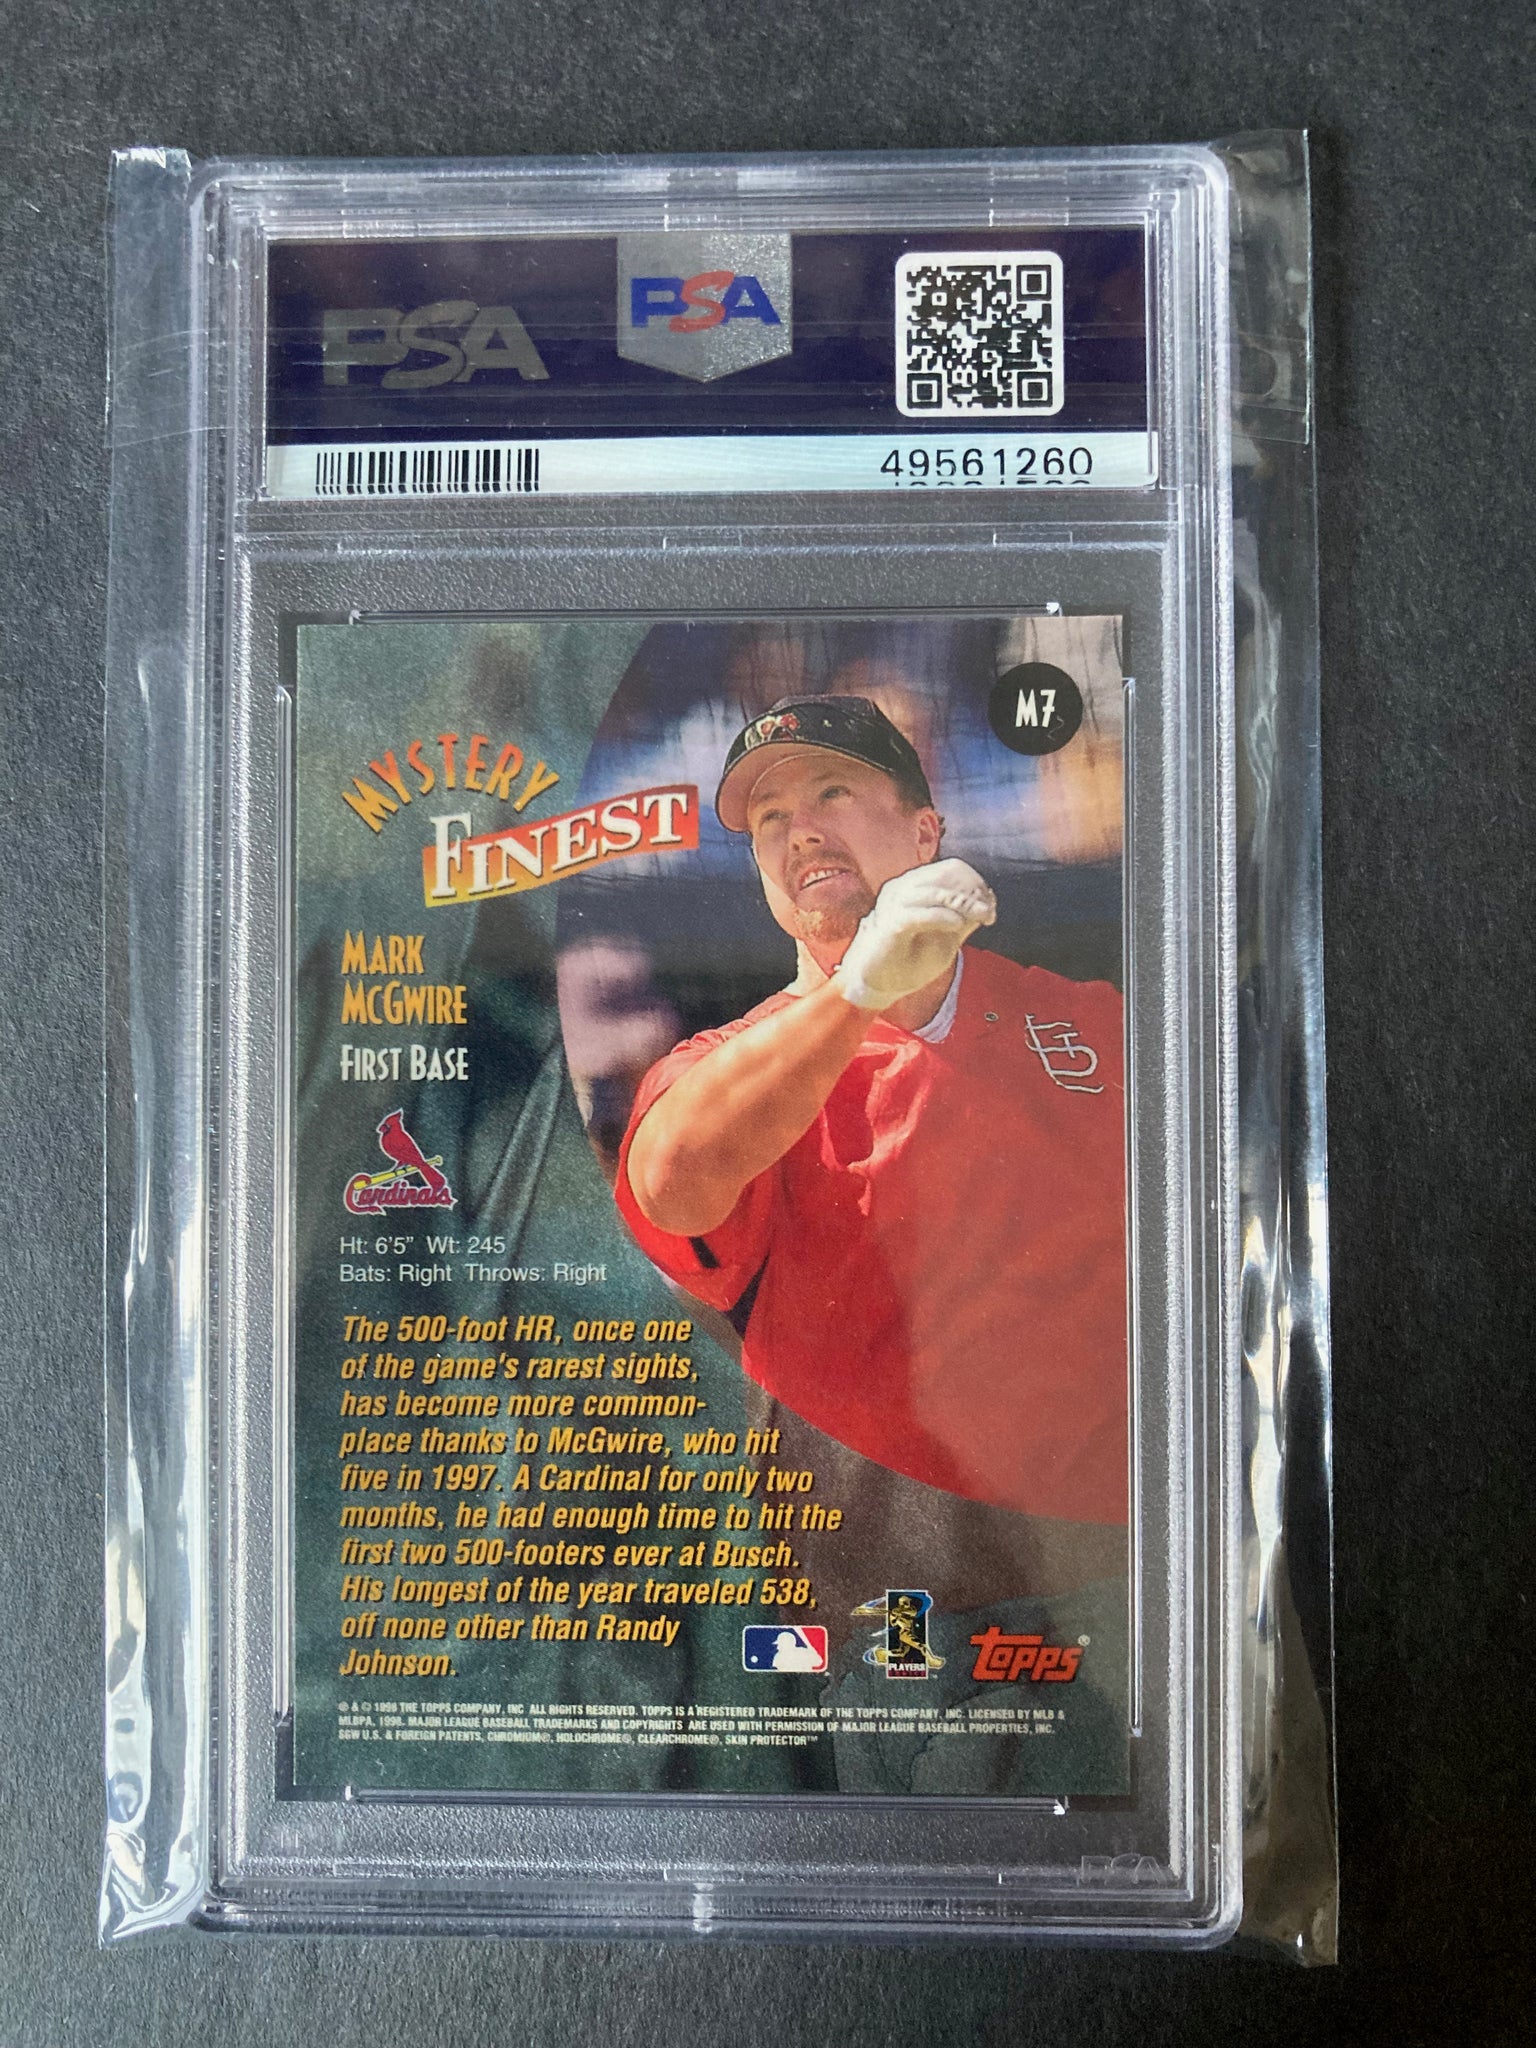 Mark McGwire #M7 Topps Mystery Finest PSA Graded 9 MINT St.Louis Cardinals